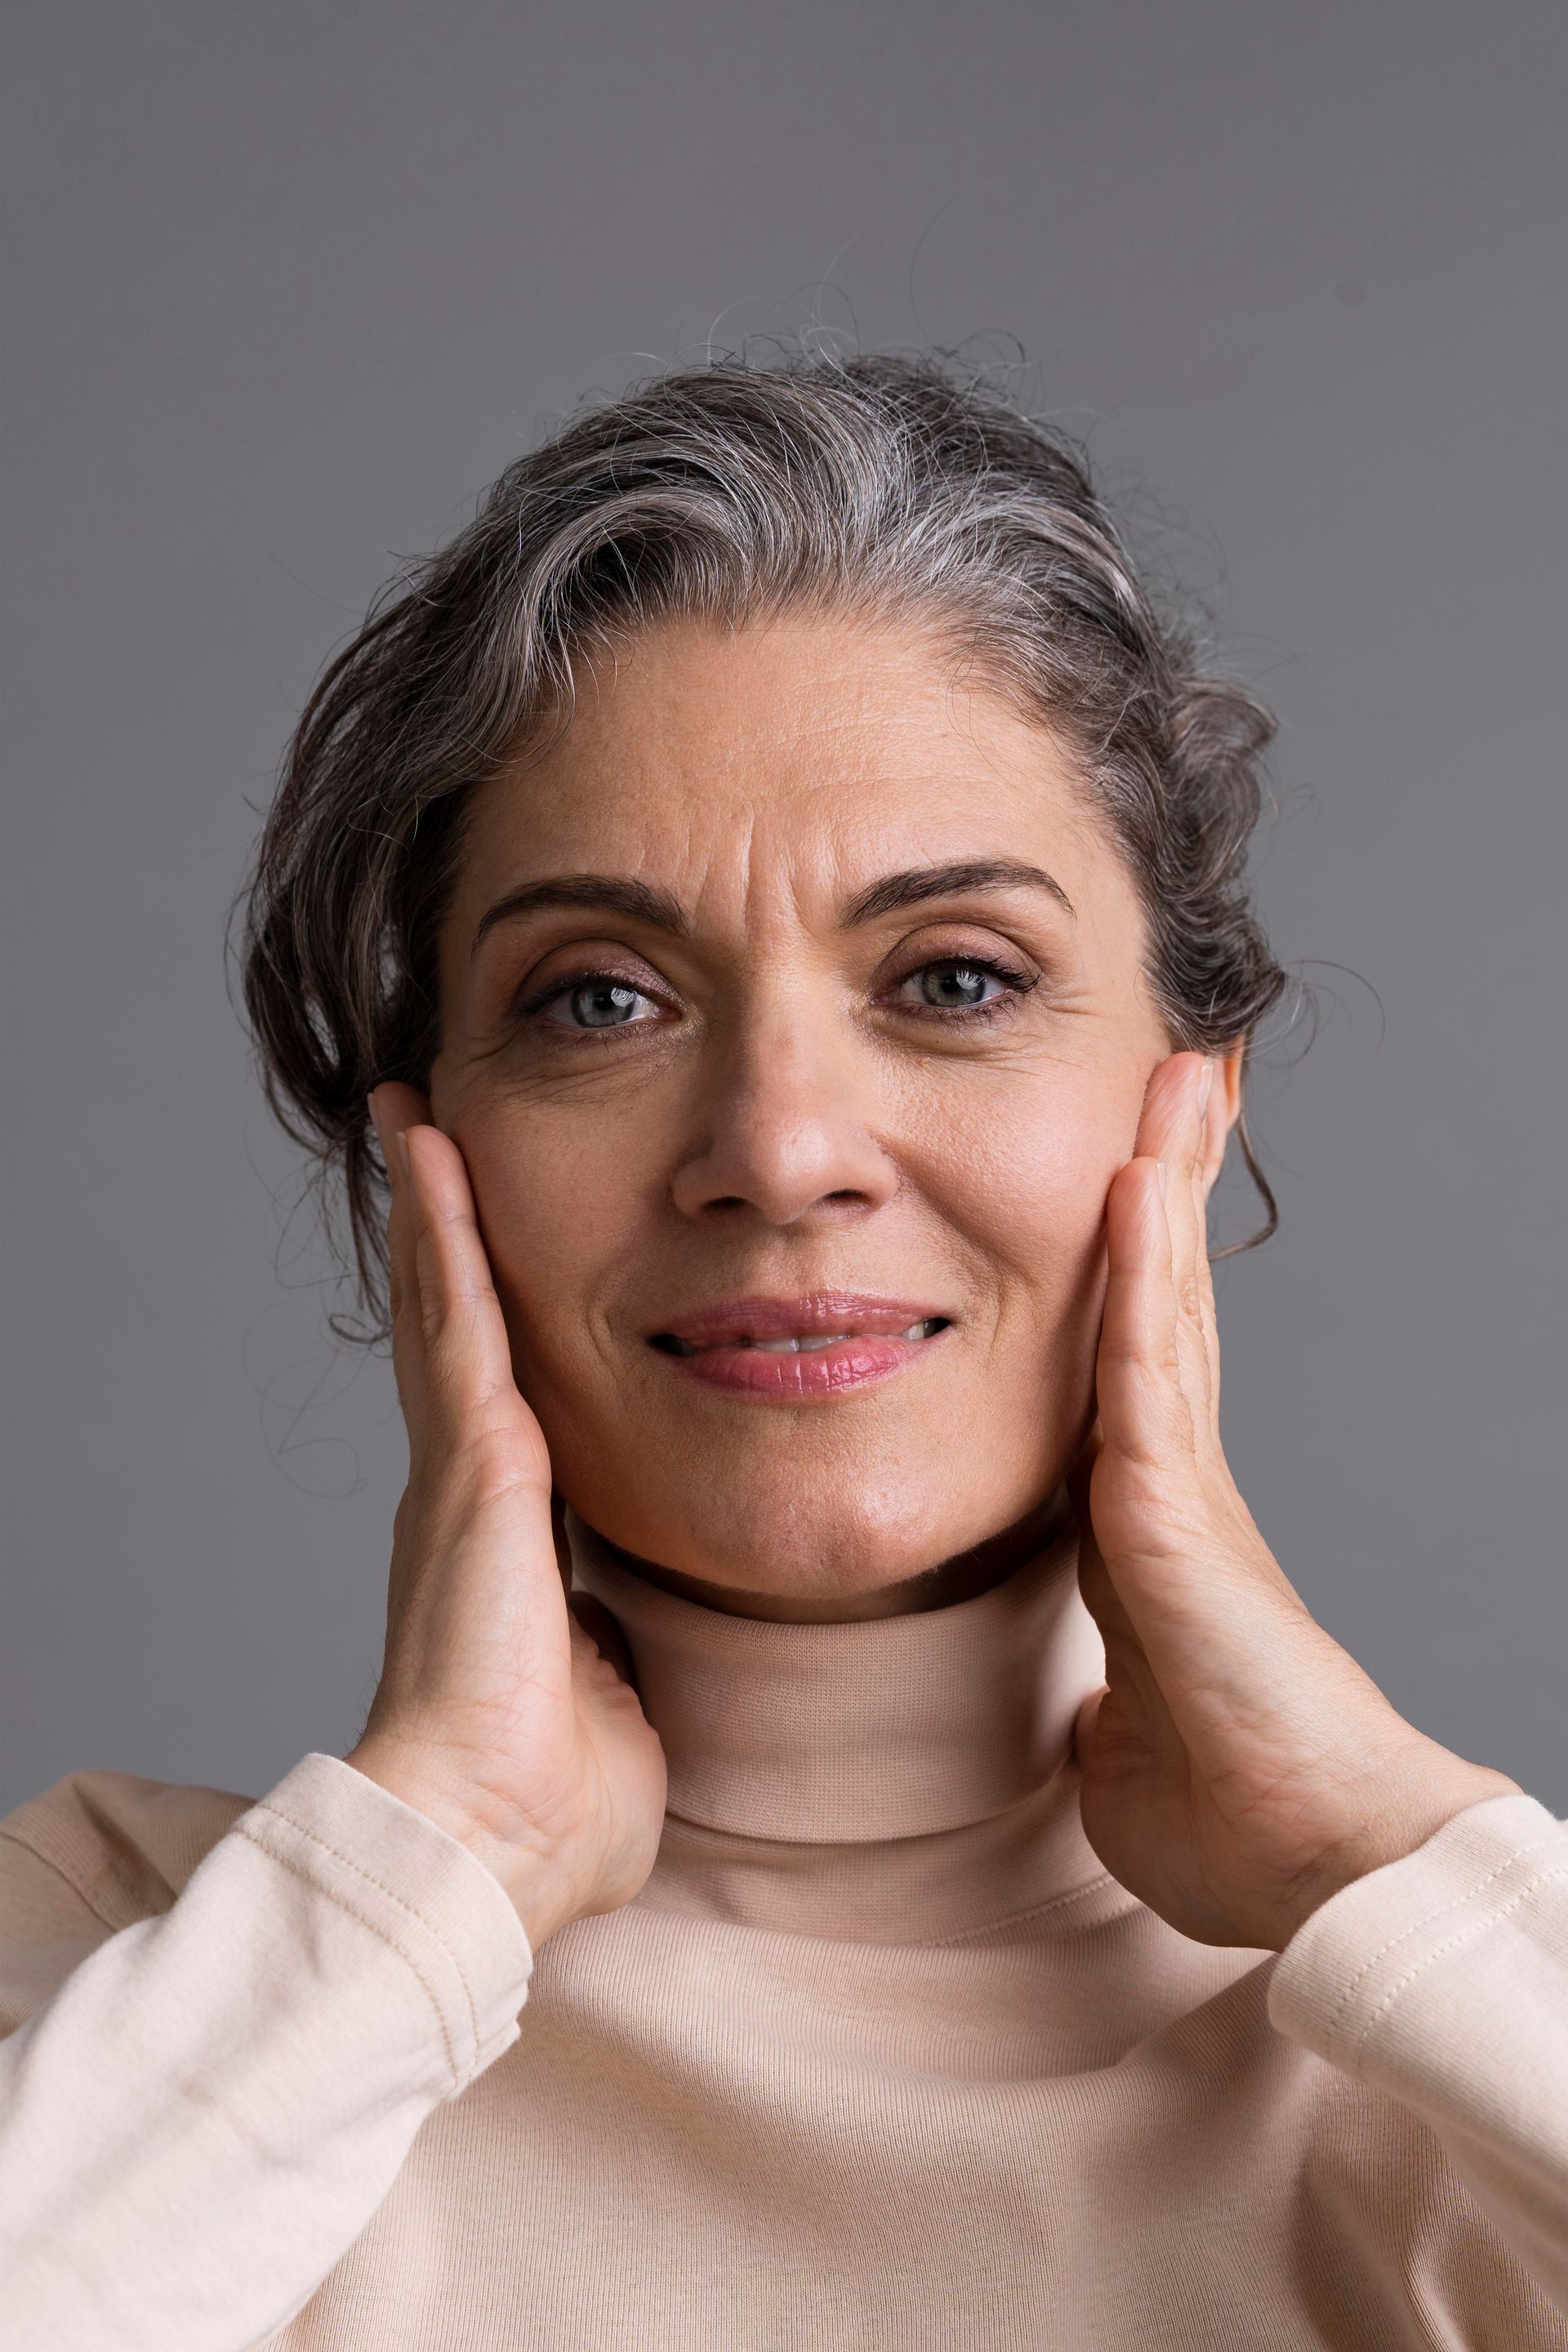 a woman with gray hair is smiling and touching her face